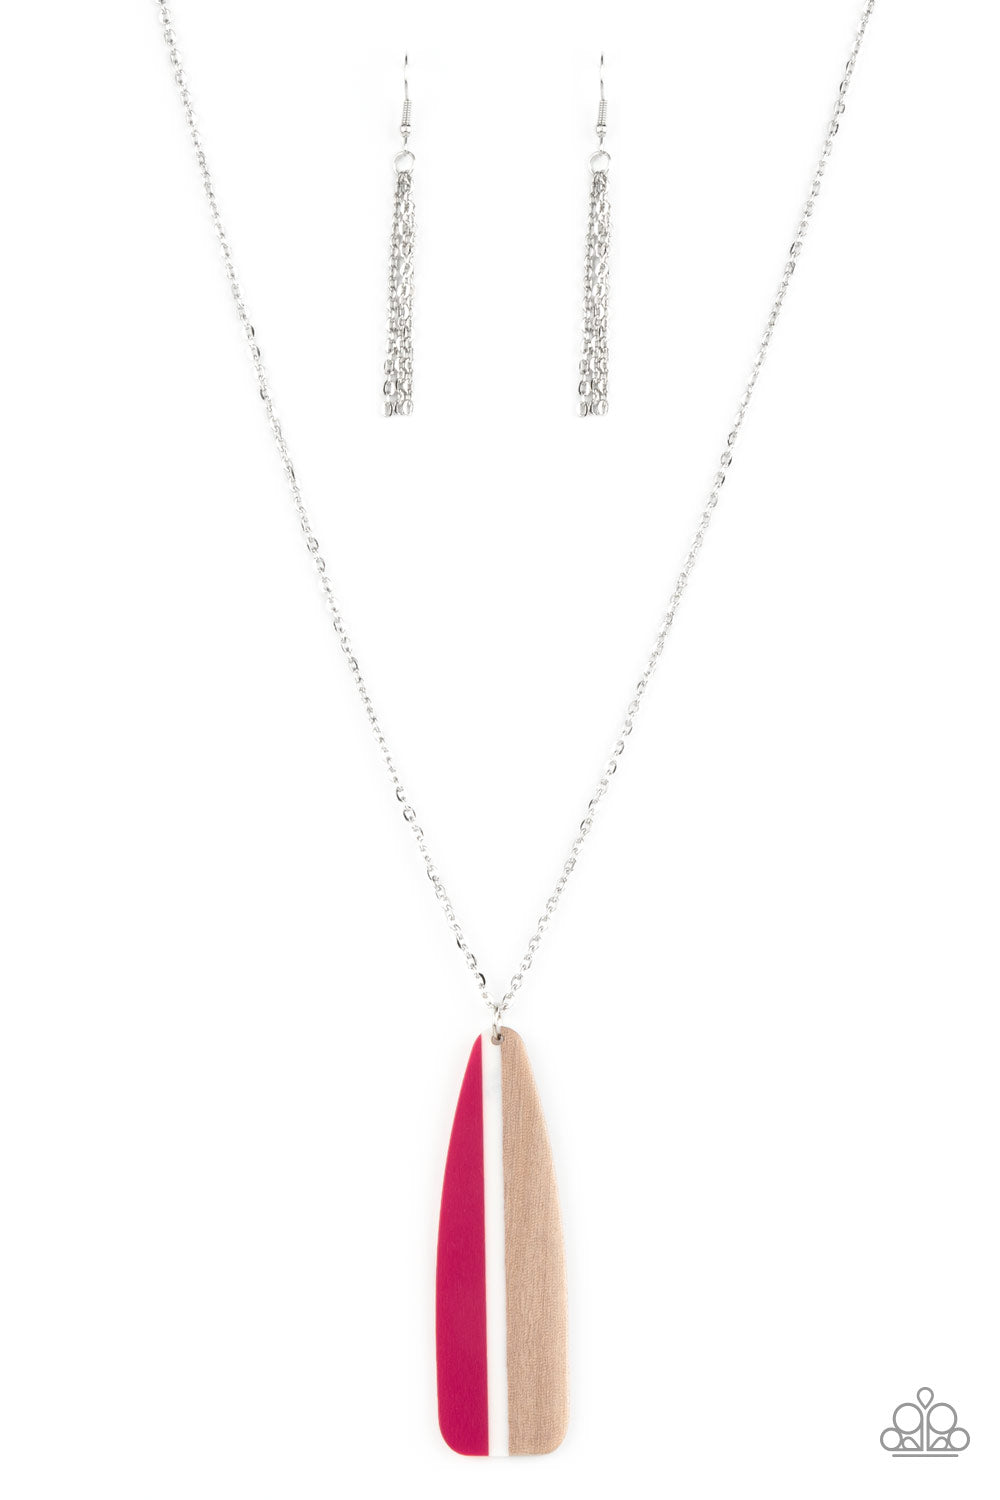 Paparazzi Necklaces - Grab a Paddle - Pink